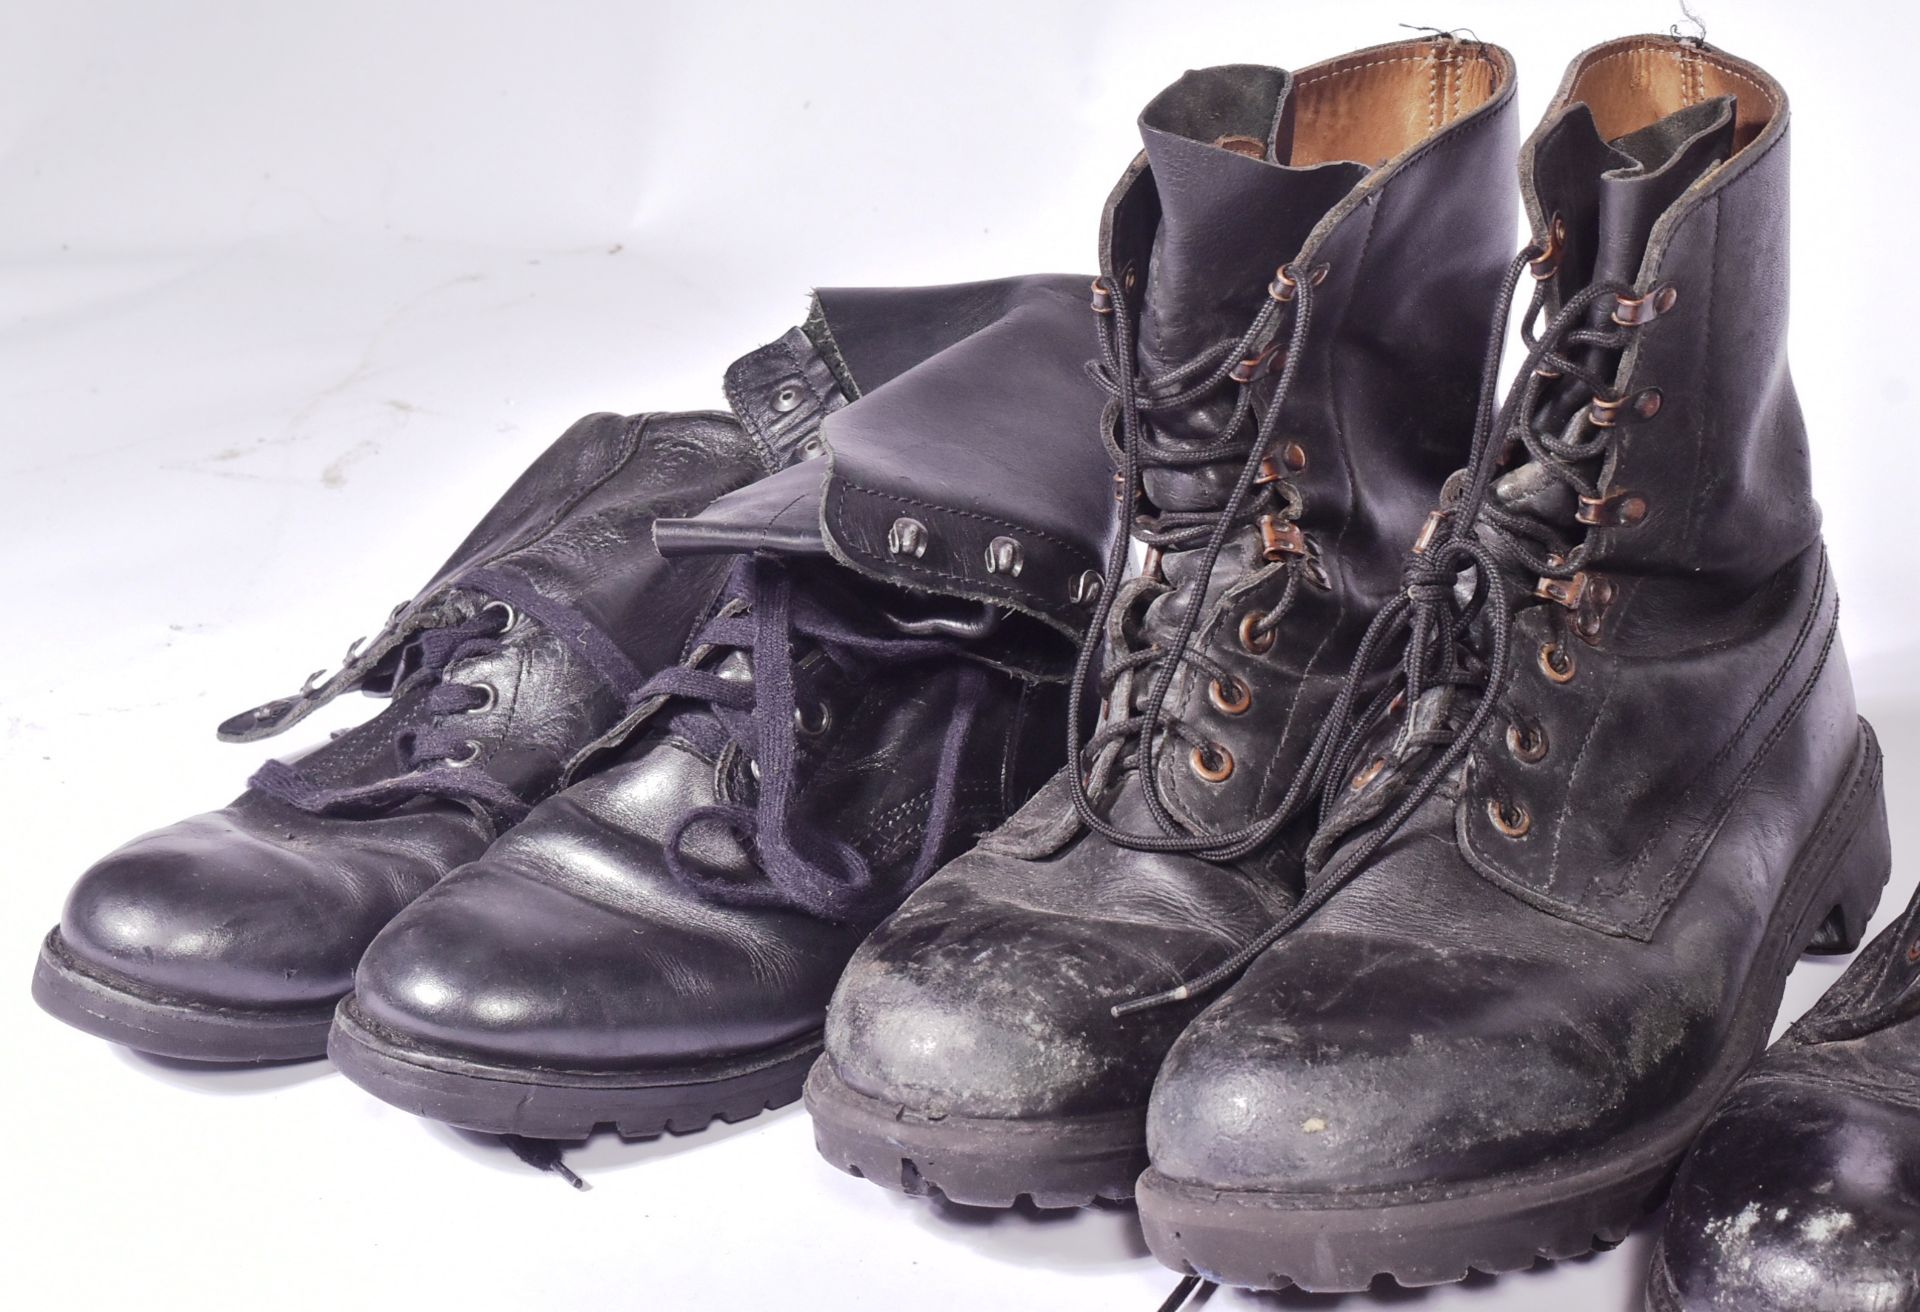 COLLECTION OF X6 HEAVY DUTY LEATHER MILITARY STYLE BOOTS - Image 2 of 6